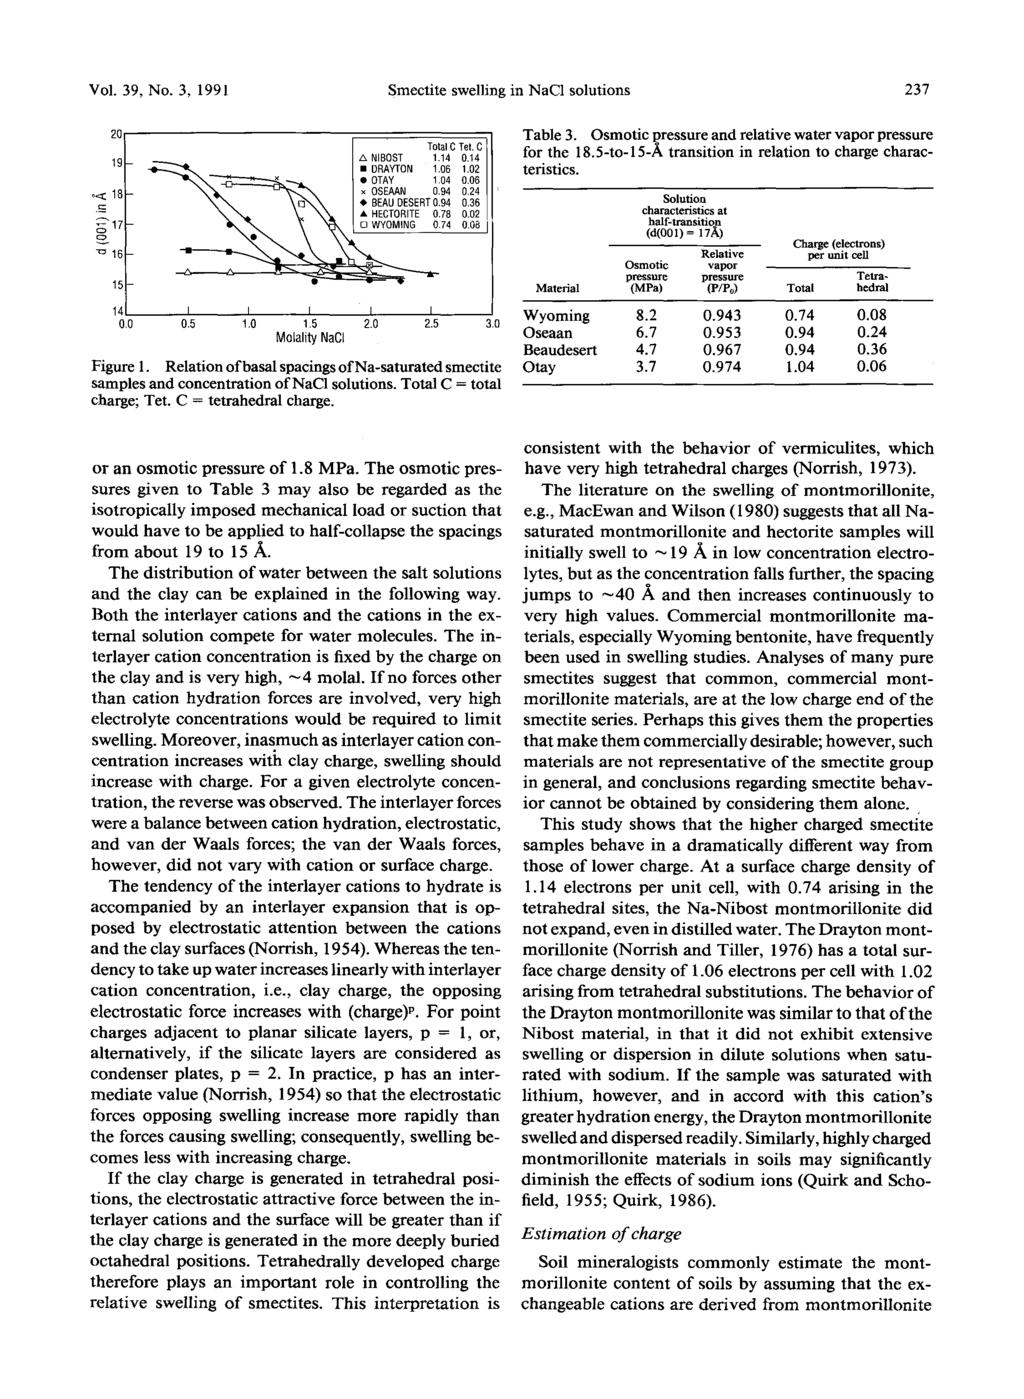 Vol. 39, No. 3, 1991 Smectite swelling in NaC1 solutions 237 20 19 o.< 18 ~ 16 15 14 0.0 A NIBOST 1.14 I 9 DRA"Cro~I 1.00 110211 ~ " ~ " ~ ' -. ~ L \"~. ~'k"-~-~ I 9 OTAY I x OSEAAN 1.04 0.94 o.